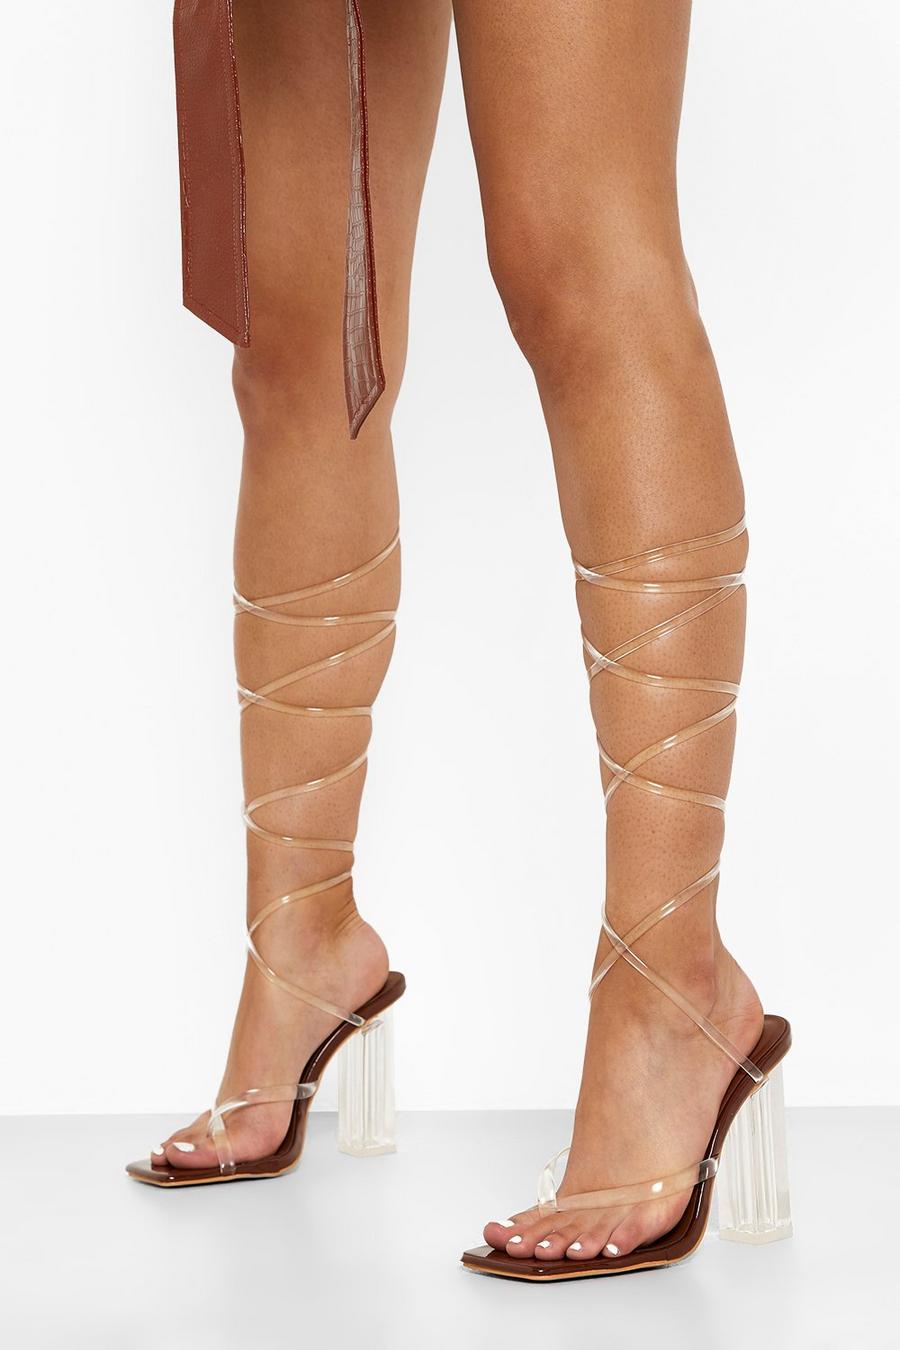 Chocolate brun Clear Patent Strappy Heels